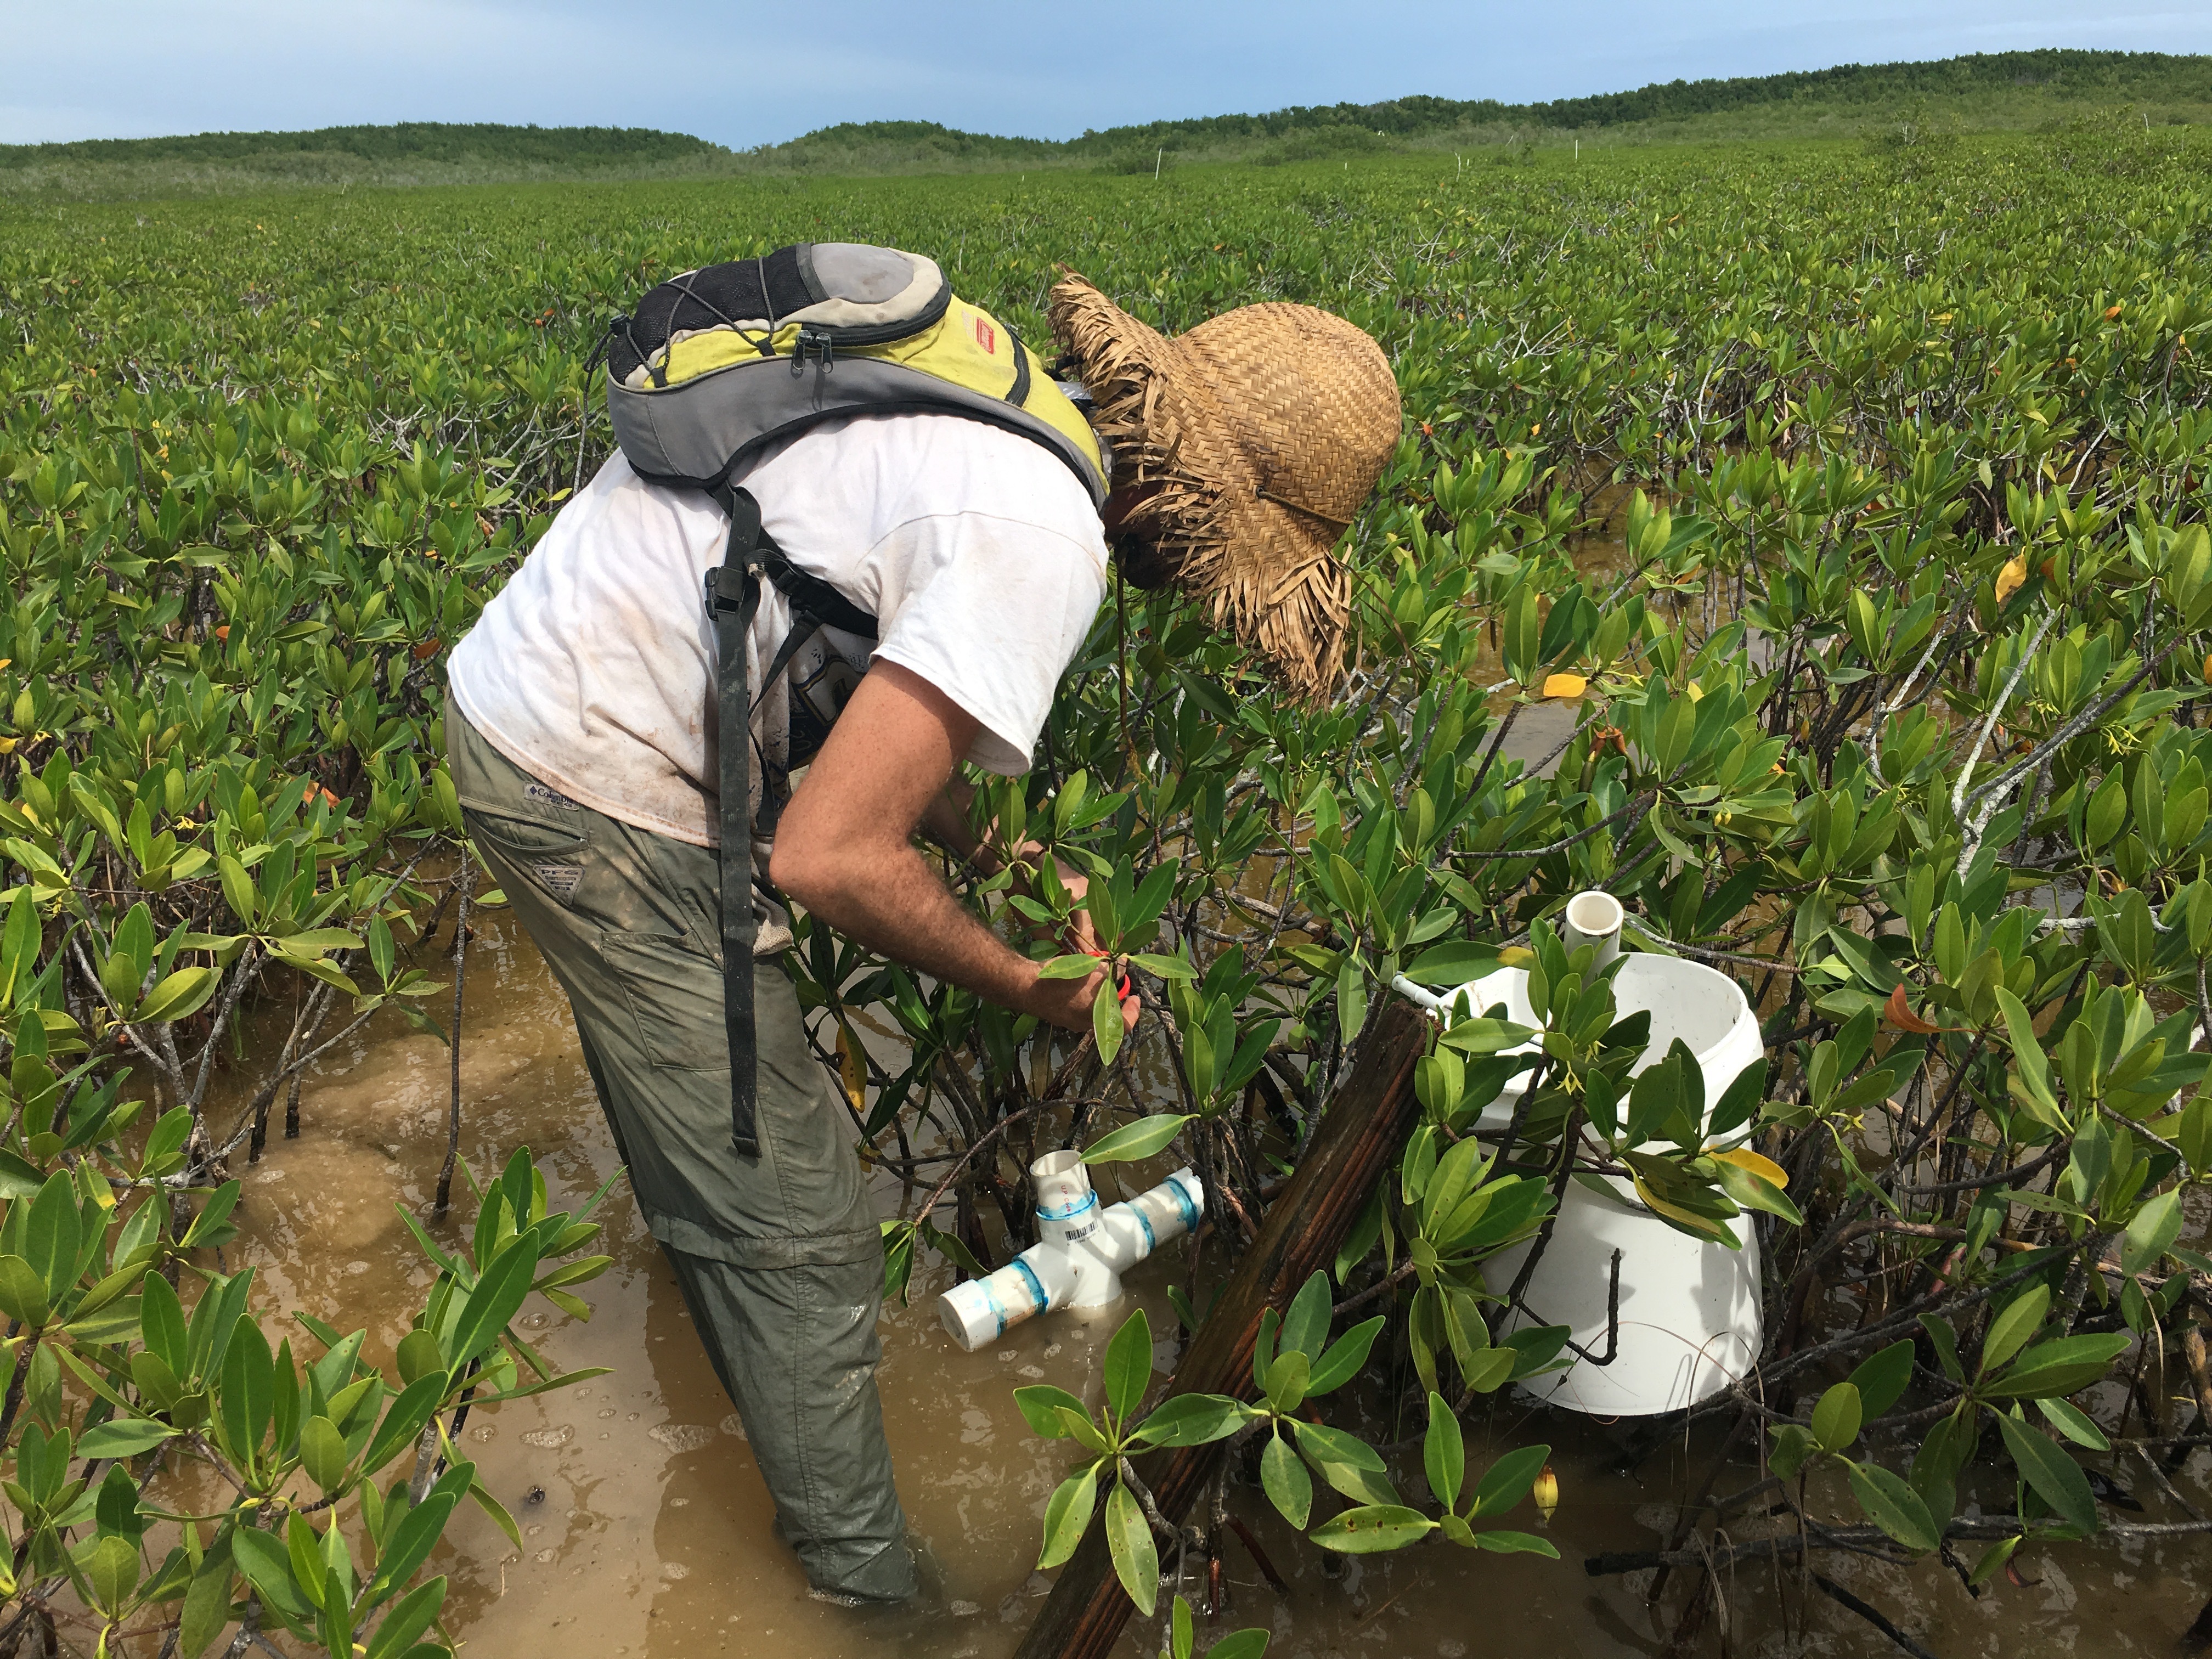 Sean Charles collecting a soil core in dwarf mangroves.